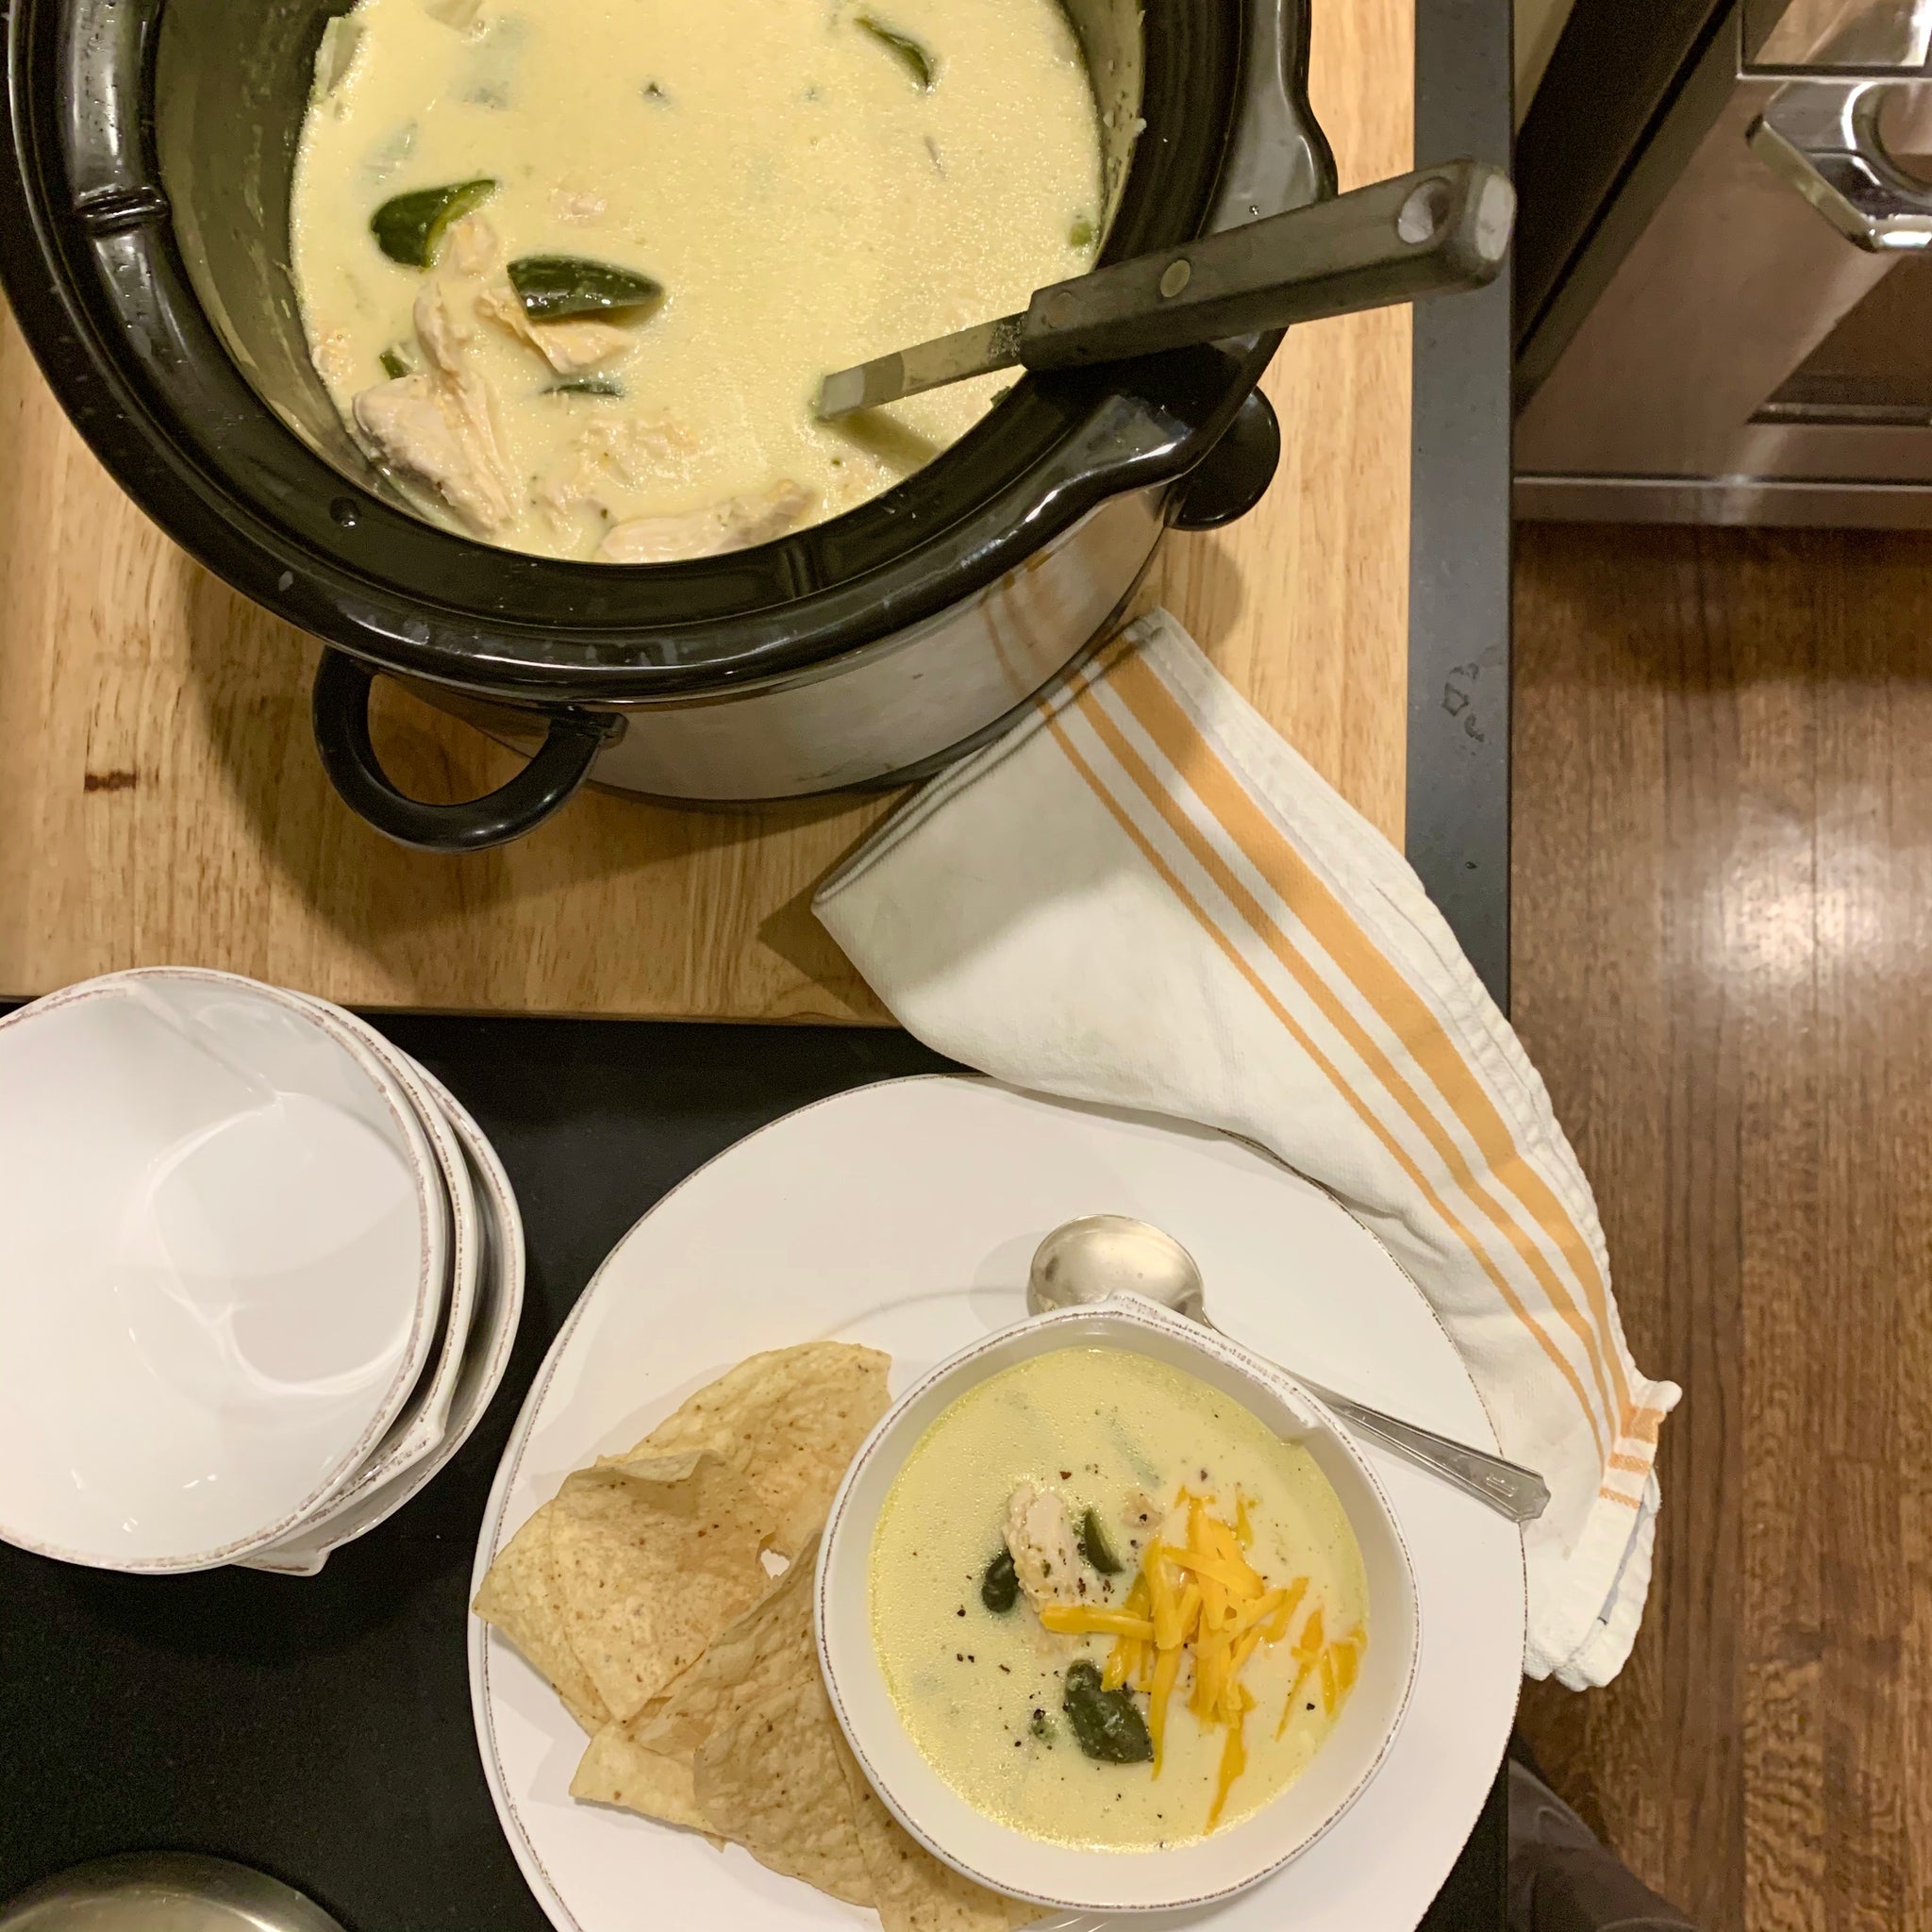 Lightened Up: Slow Cooker Creamy Chicken Relleno Soup